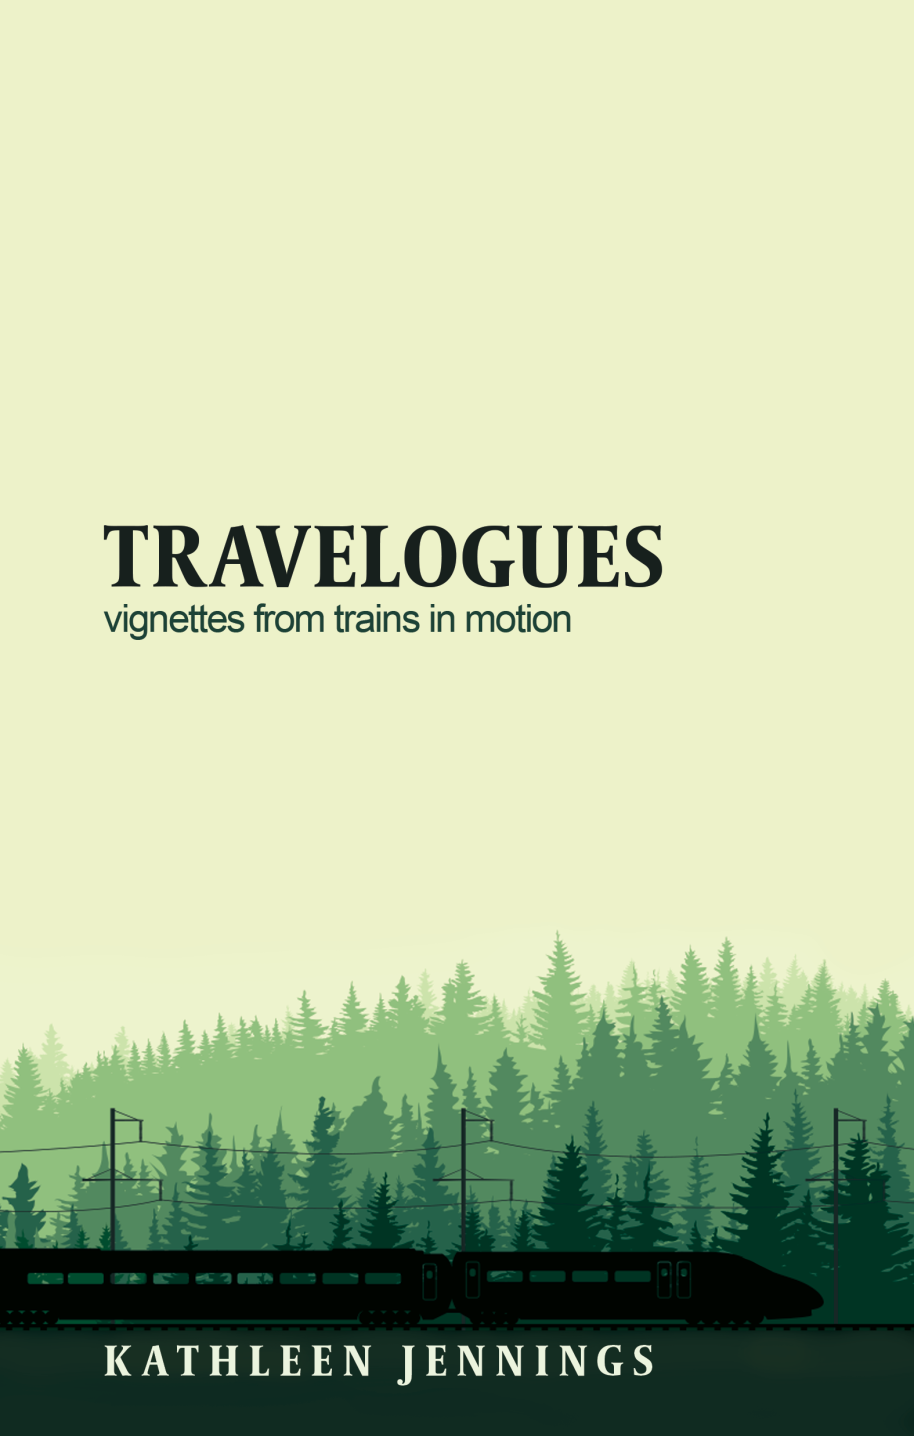 The cover of Kathleen Jenningss book Travelogues It features a train rushing past a pine forest